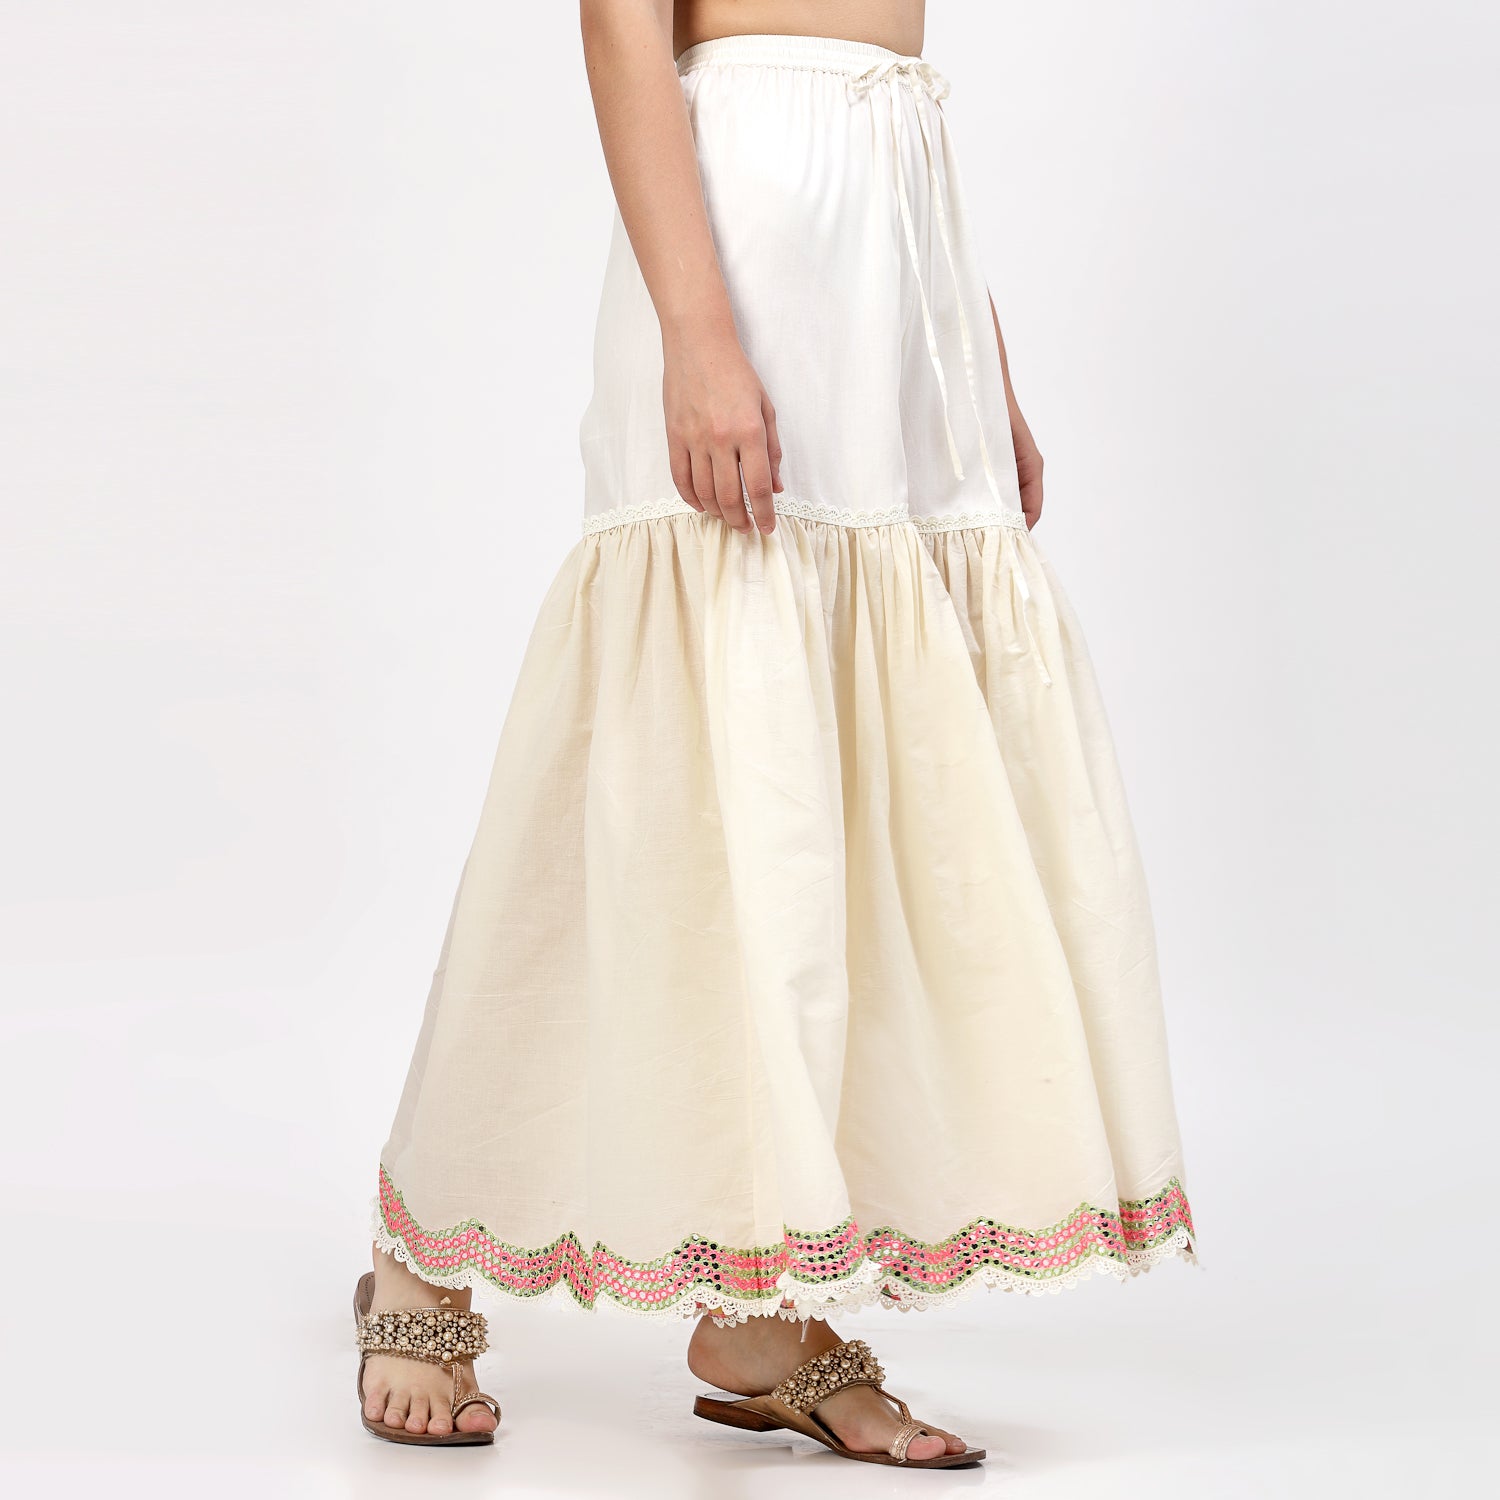 Off White Glaze Cotton Sharara With Mirror Embroidery At Hem